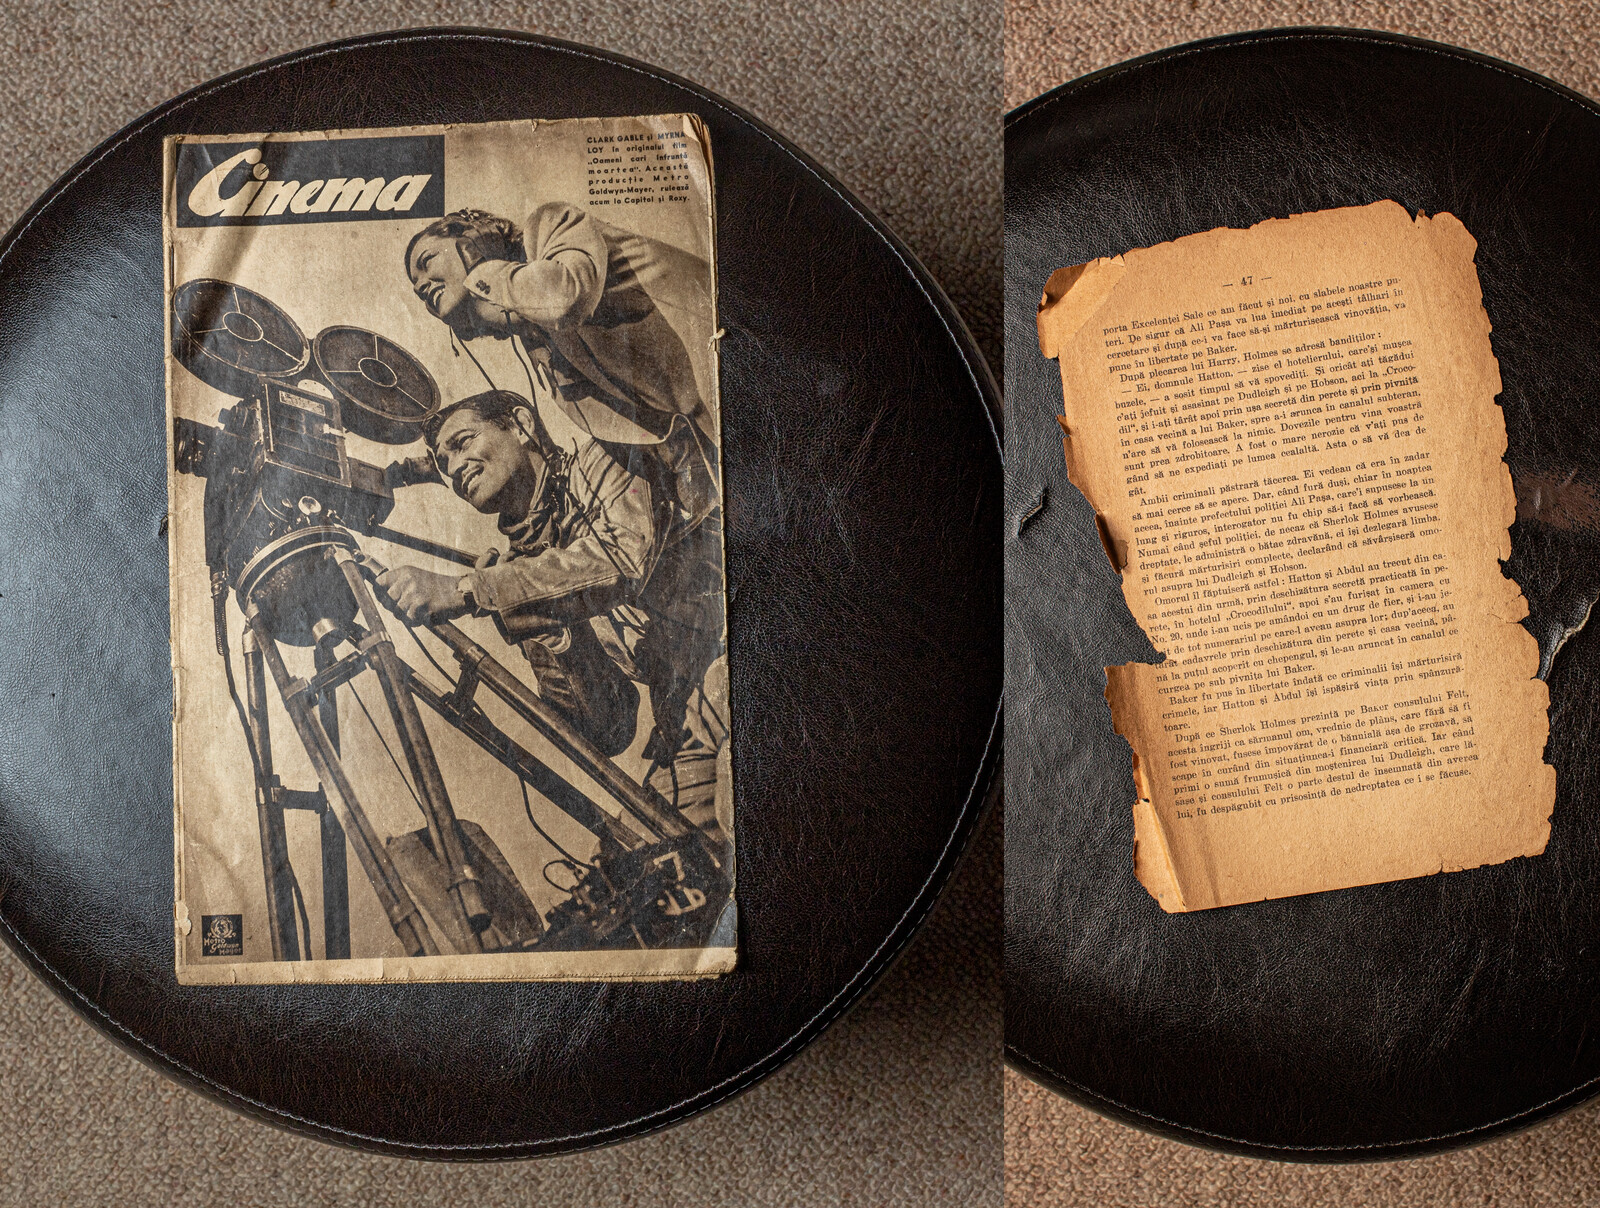 I found a torn paper from an old book and a "Cinema" magazine from 1939 and i just took photos of them with my canon 6d mk 2 photo camera.